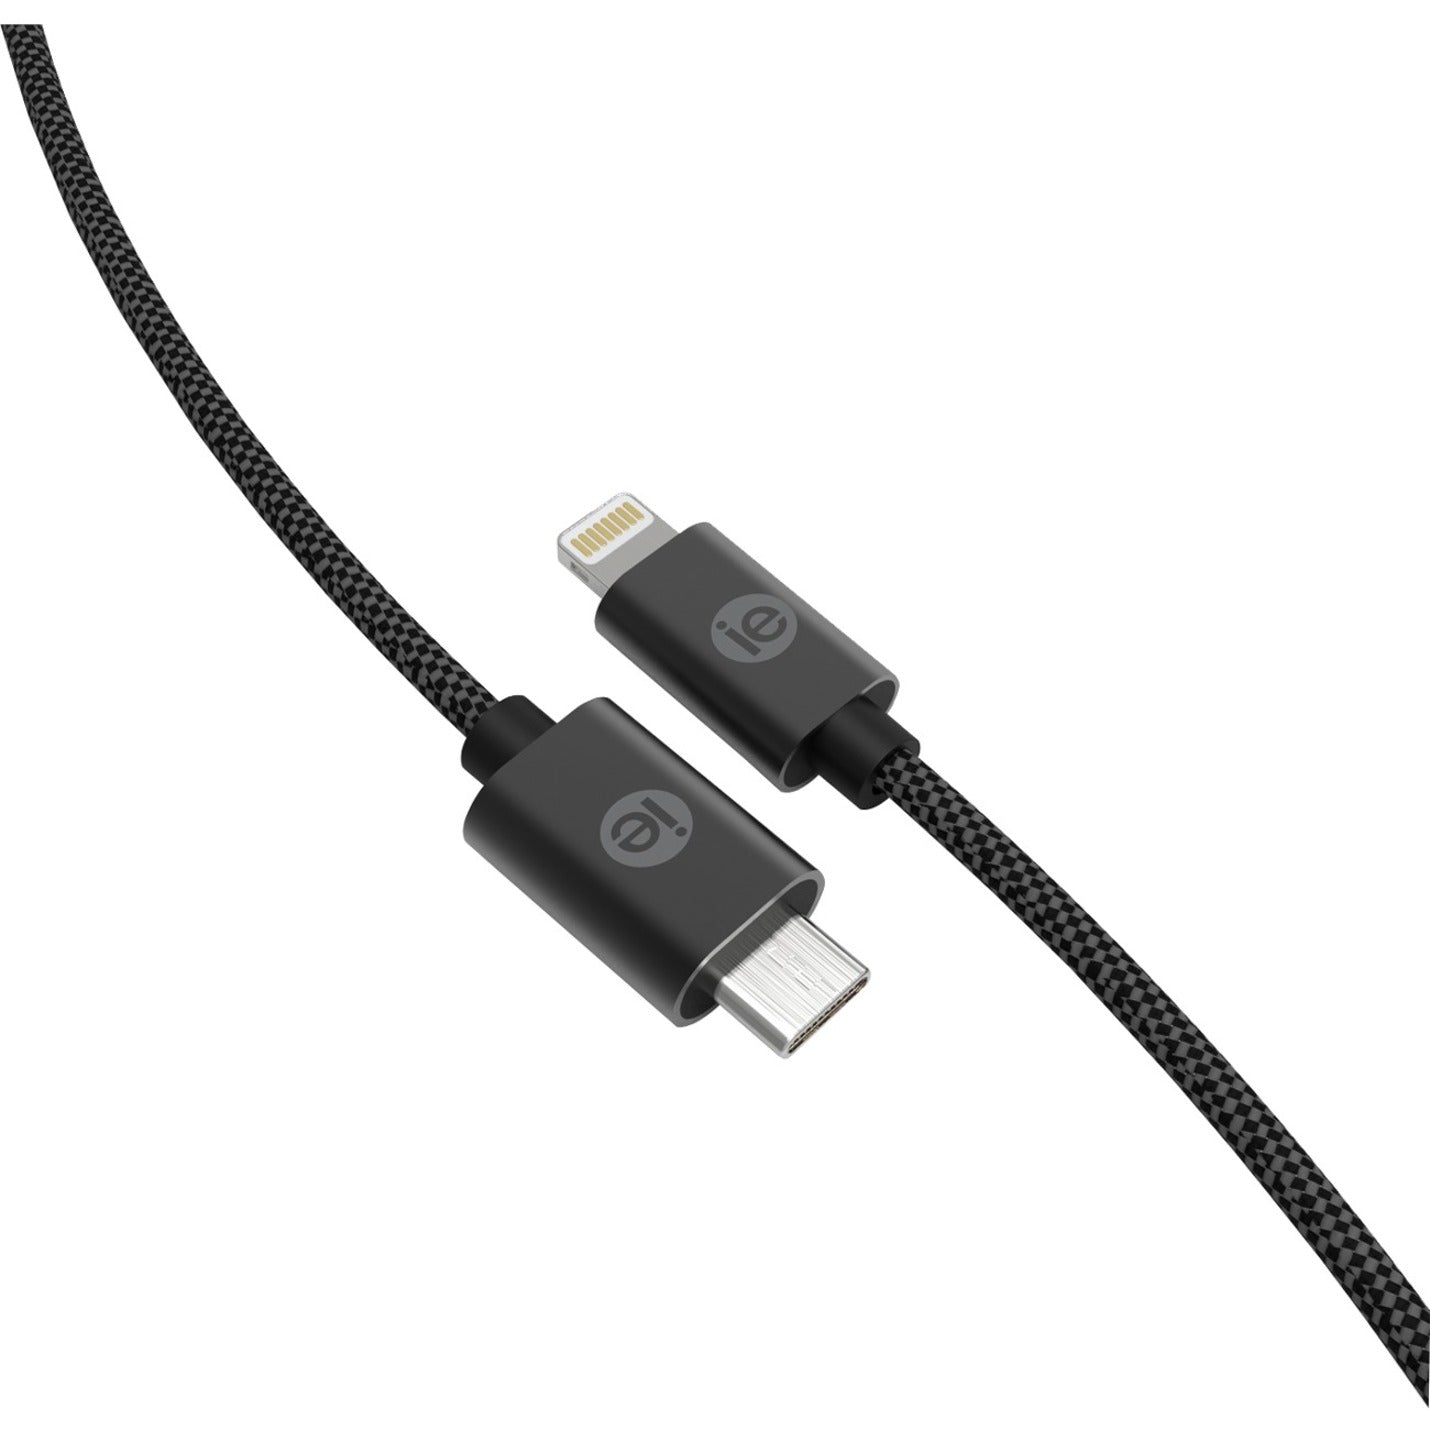 DigiPower IEN-BC6C2L-BK Lightning/USB Data Transfer Cable, Fast Charging and Data Sync